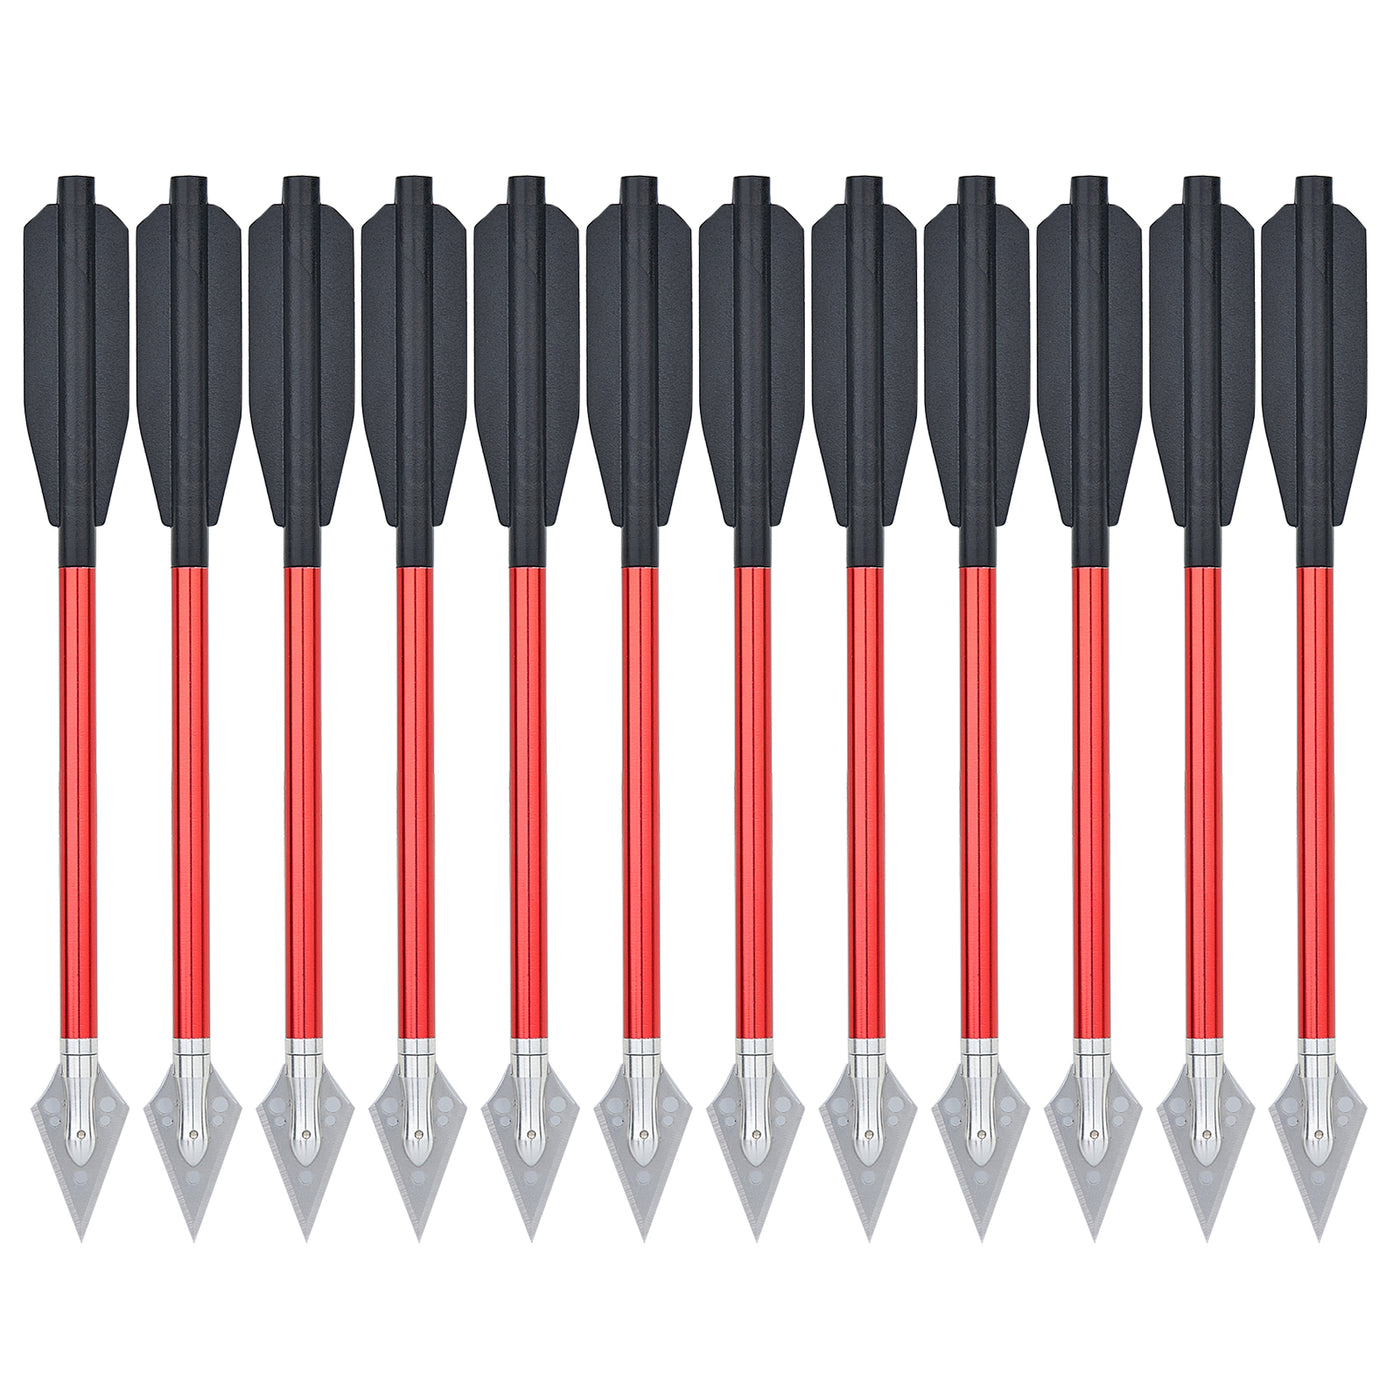 12x 6.5" Archery Aluminum Crossbow Bolts Red Shafts Black Vanes with Replaceable Broadheads for Hunting